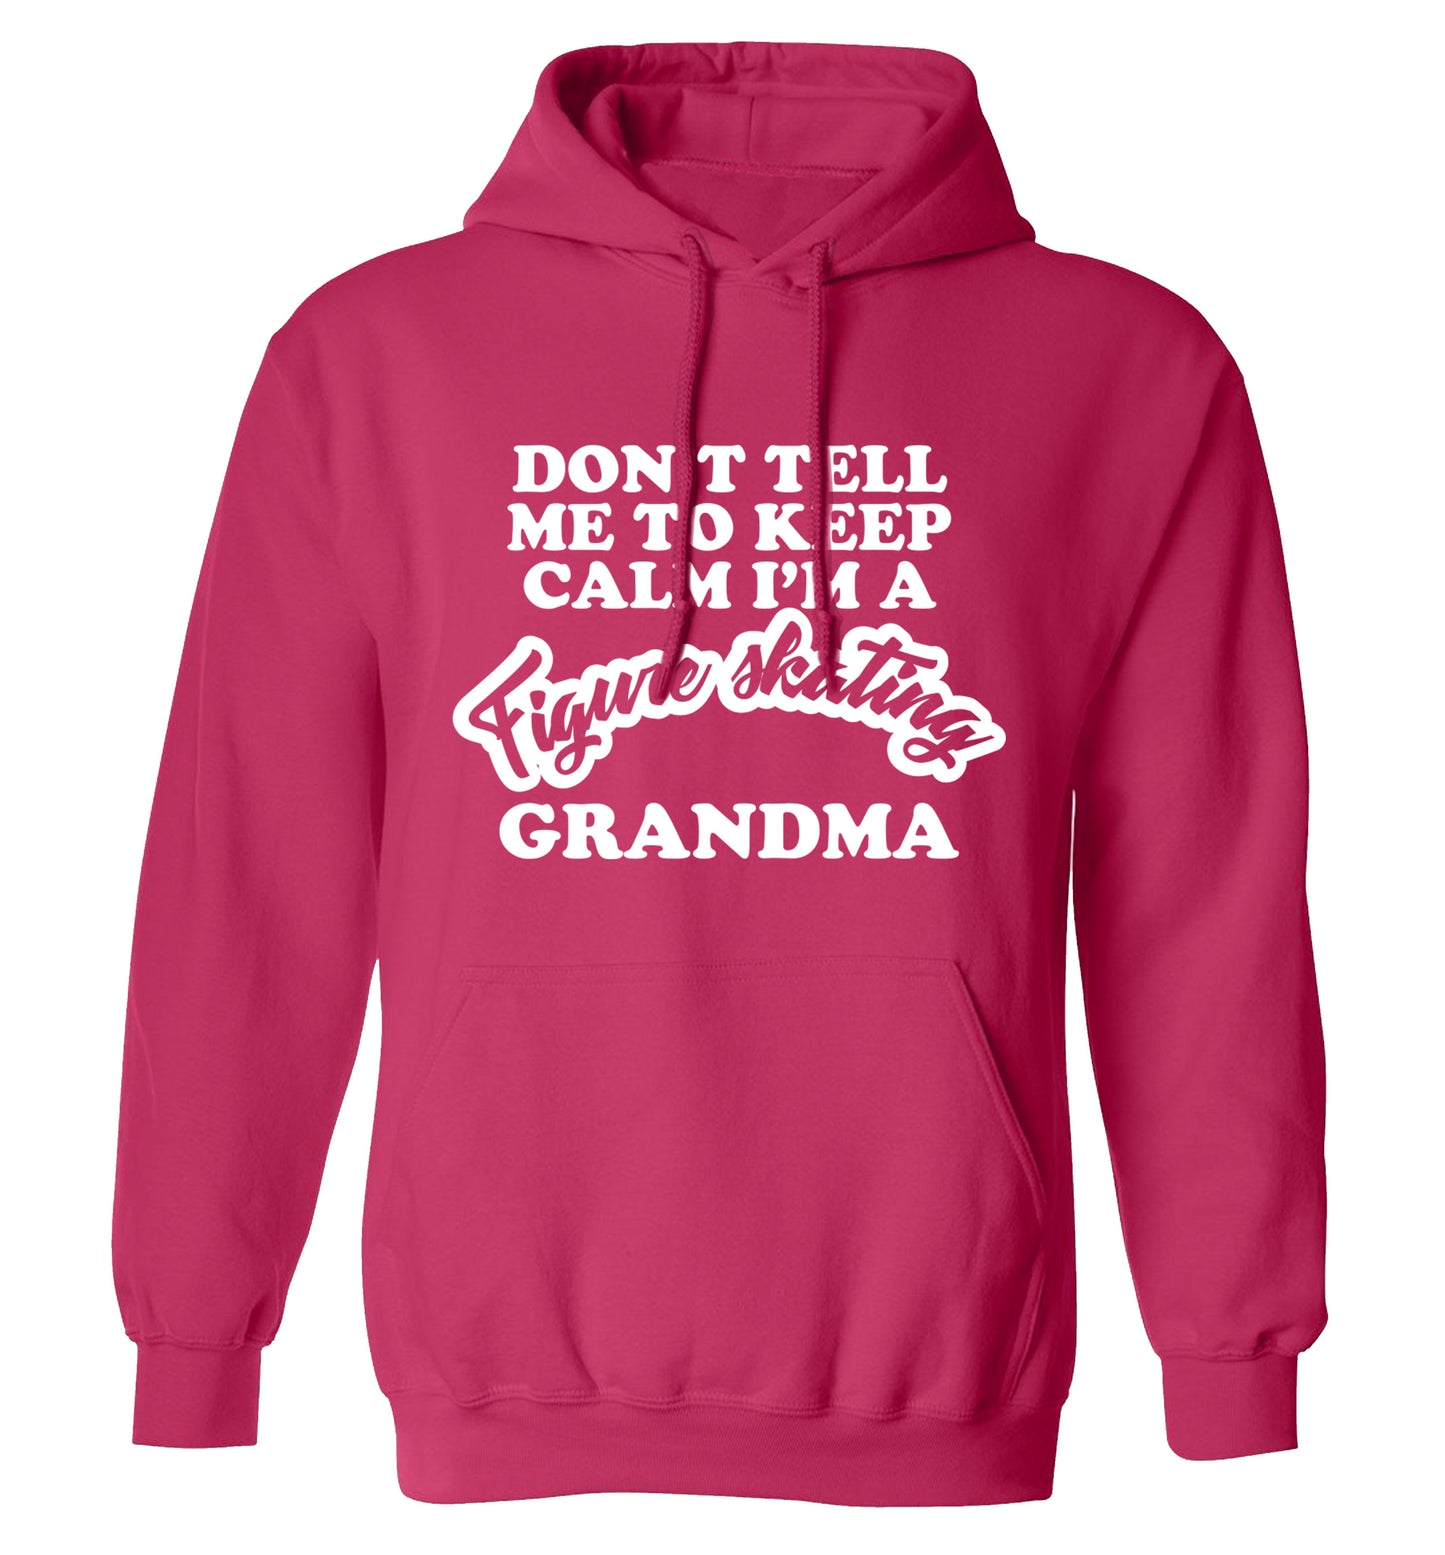 Don't tell me to keep calm I'm a figure skating grandma adults unisexpink hoodie 2XL